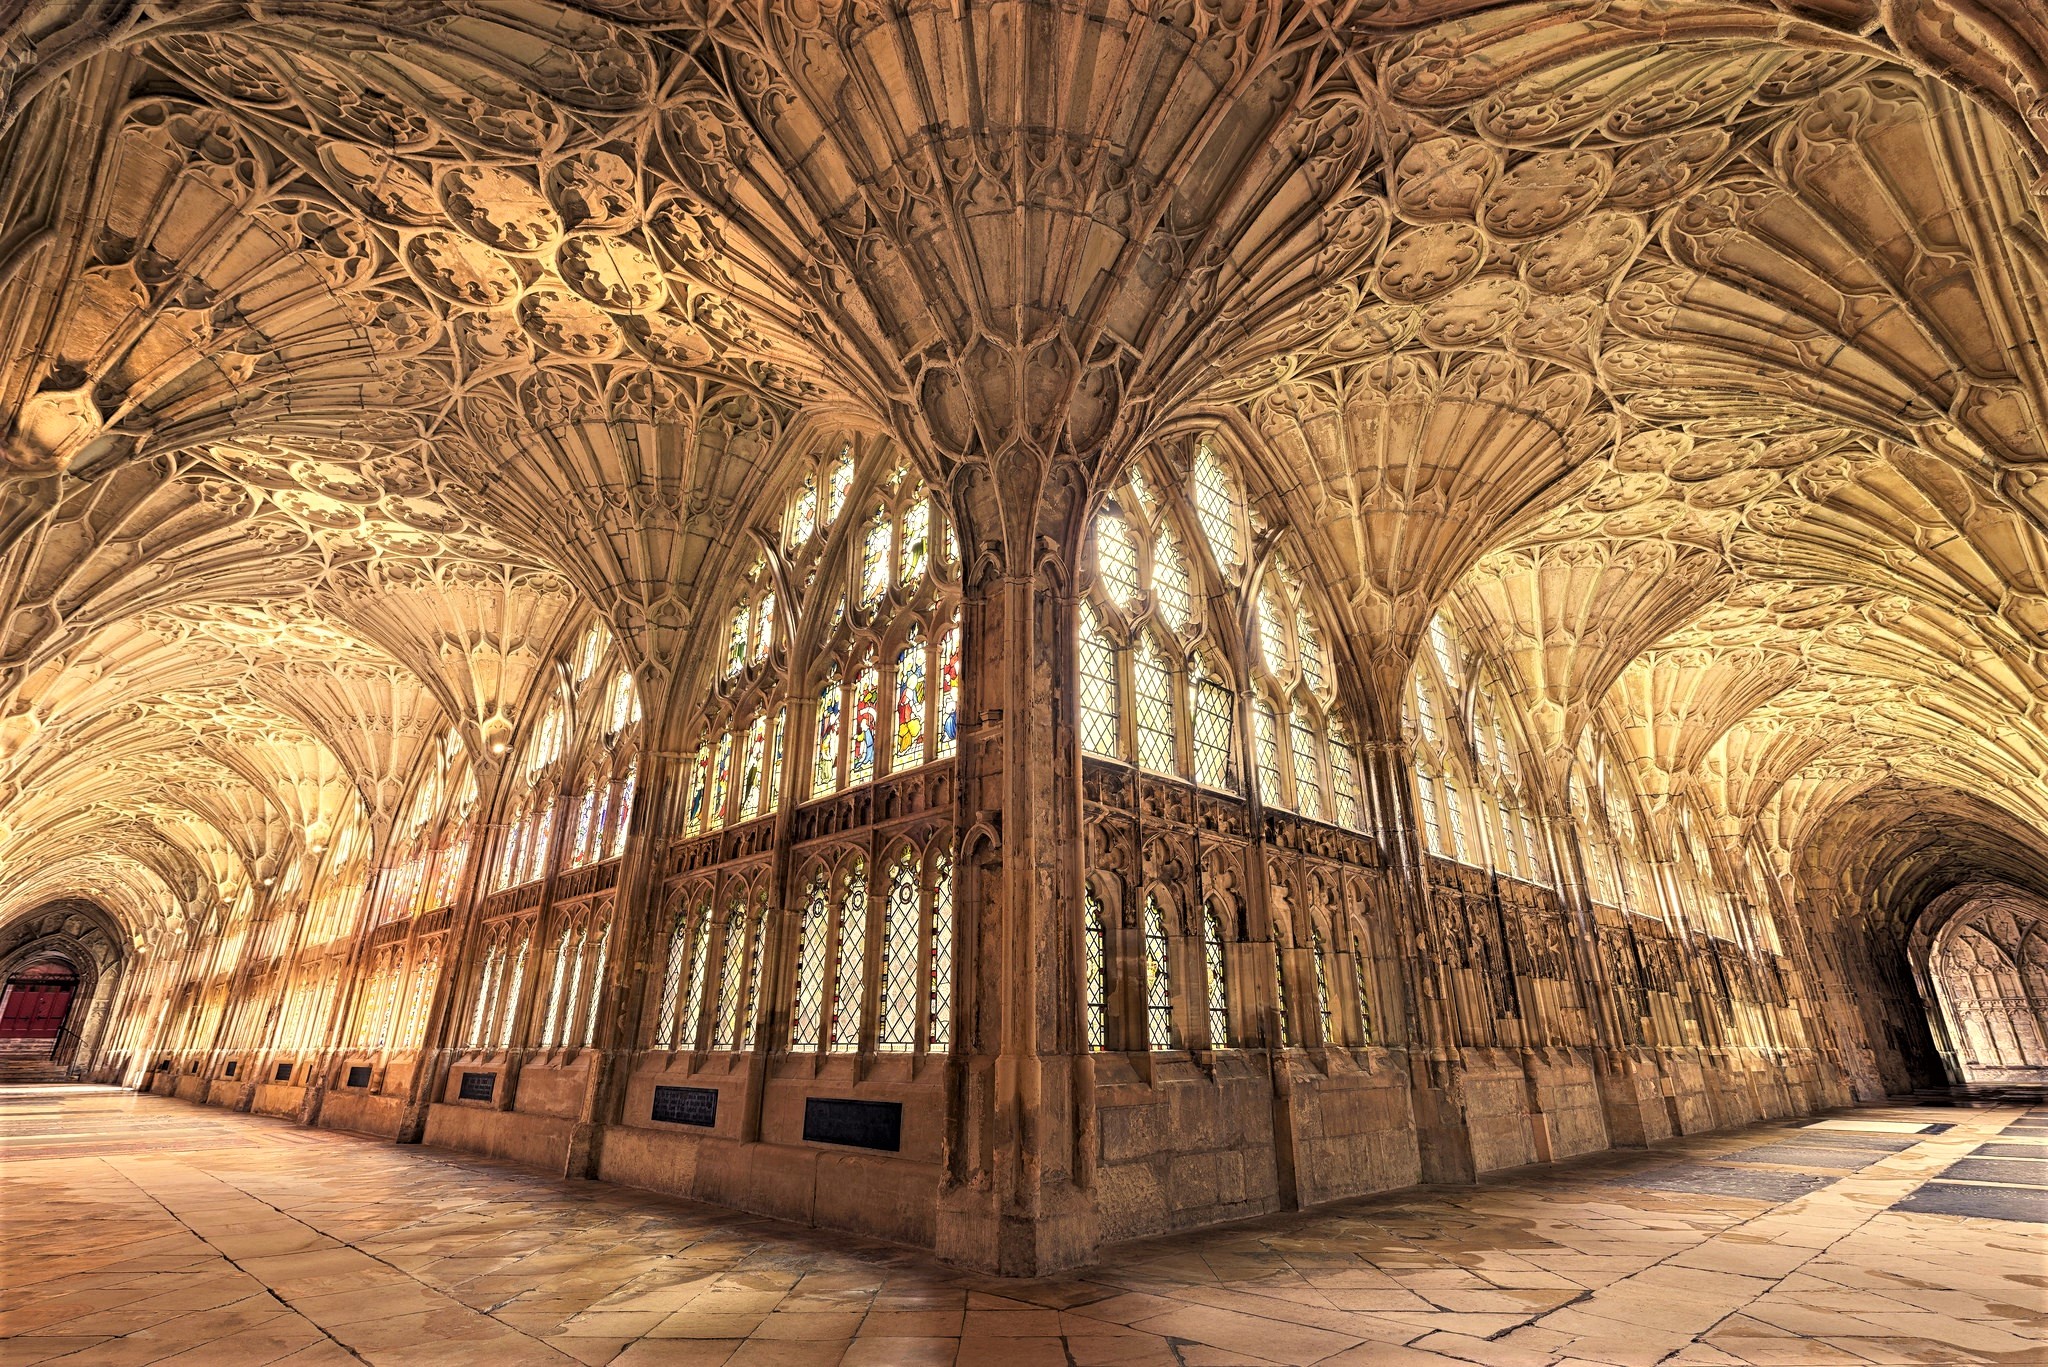 Gothic Architecture of Gloucester Cathedral in Gloucester, England